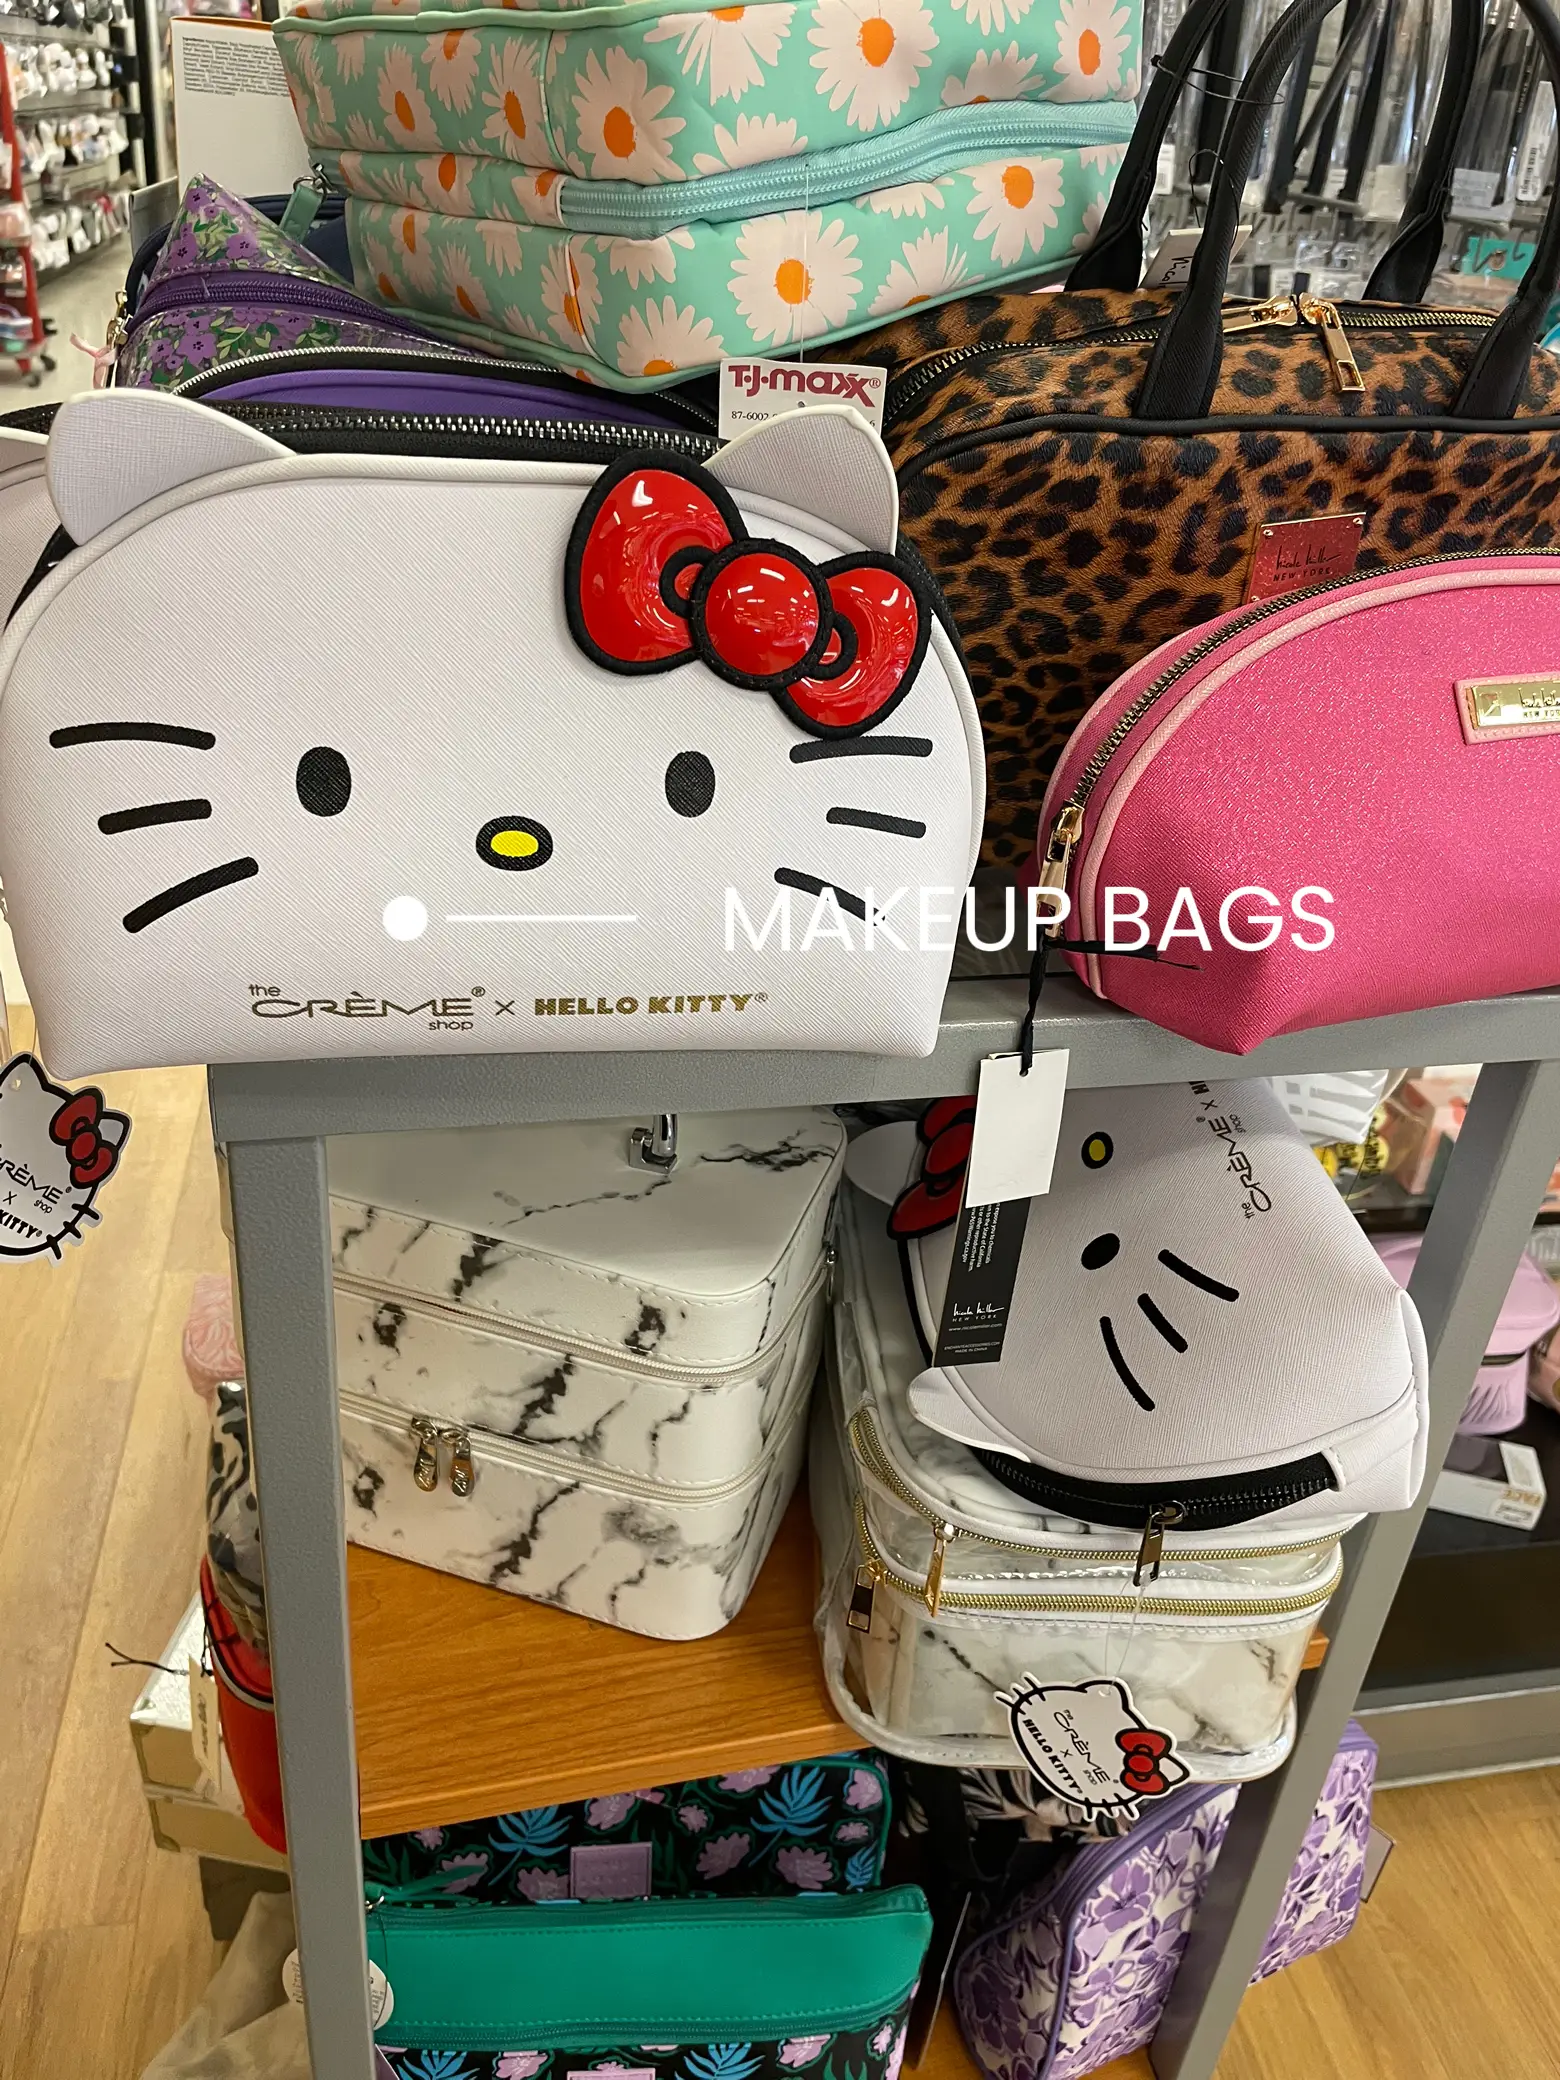 hello kitty jewelry finds that I found yesterday at TJ Maxx. : r/sanrio